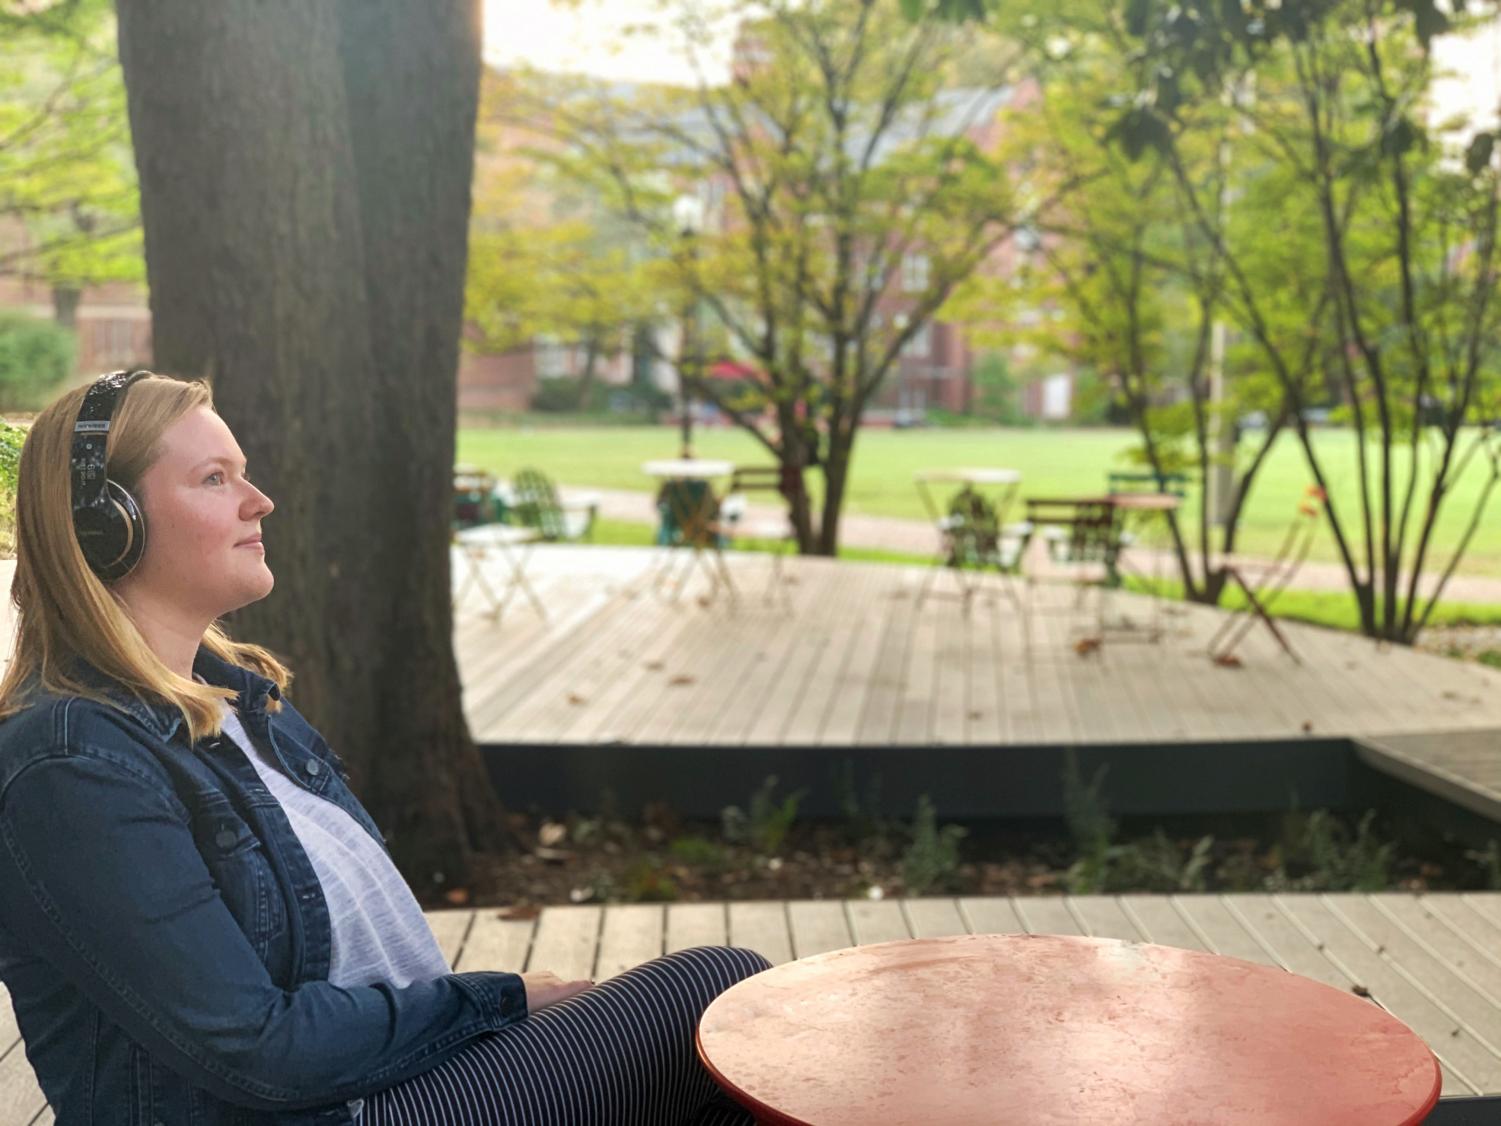 Like many students, first-year Alexa White enjoys listening to music. However, listening to songs repeatedly can result in earworms. (Photo courtesy Fiona Wu)